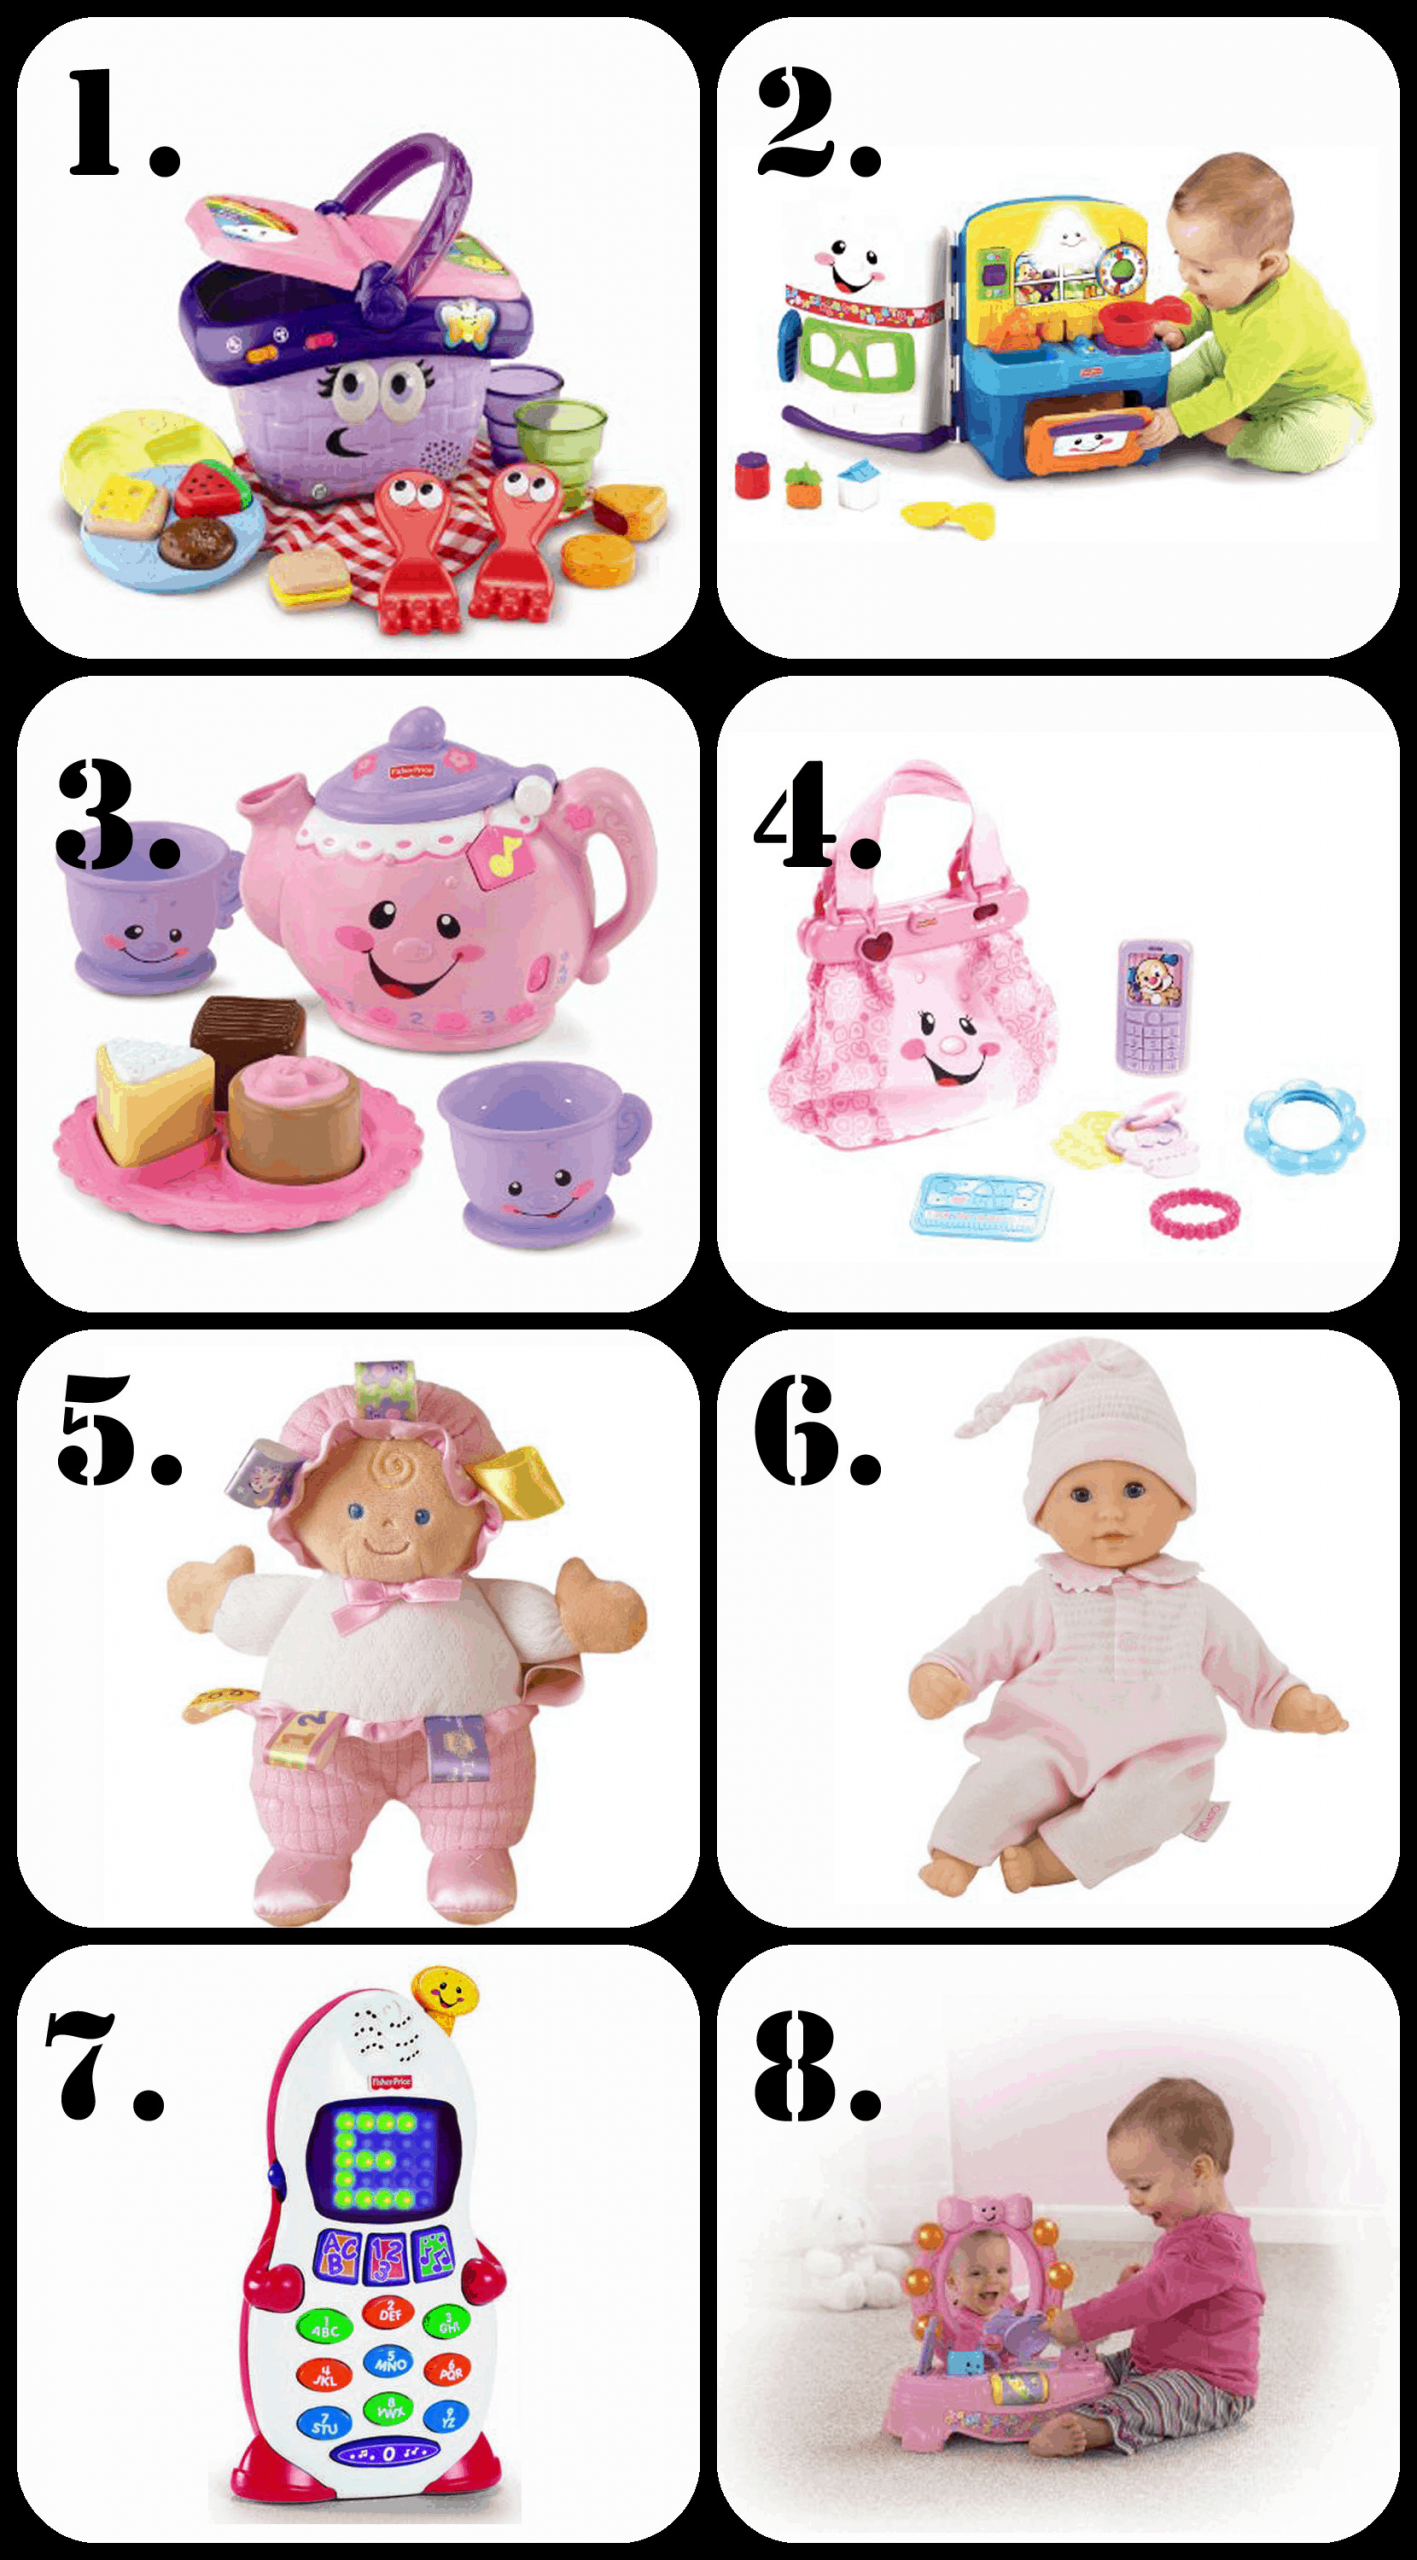 Gift Ideas For One Year Old Girls
 The Ultimate List of Gift Ideas for a 1 Year Old Girl